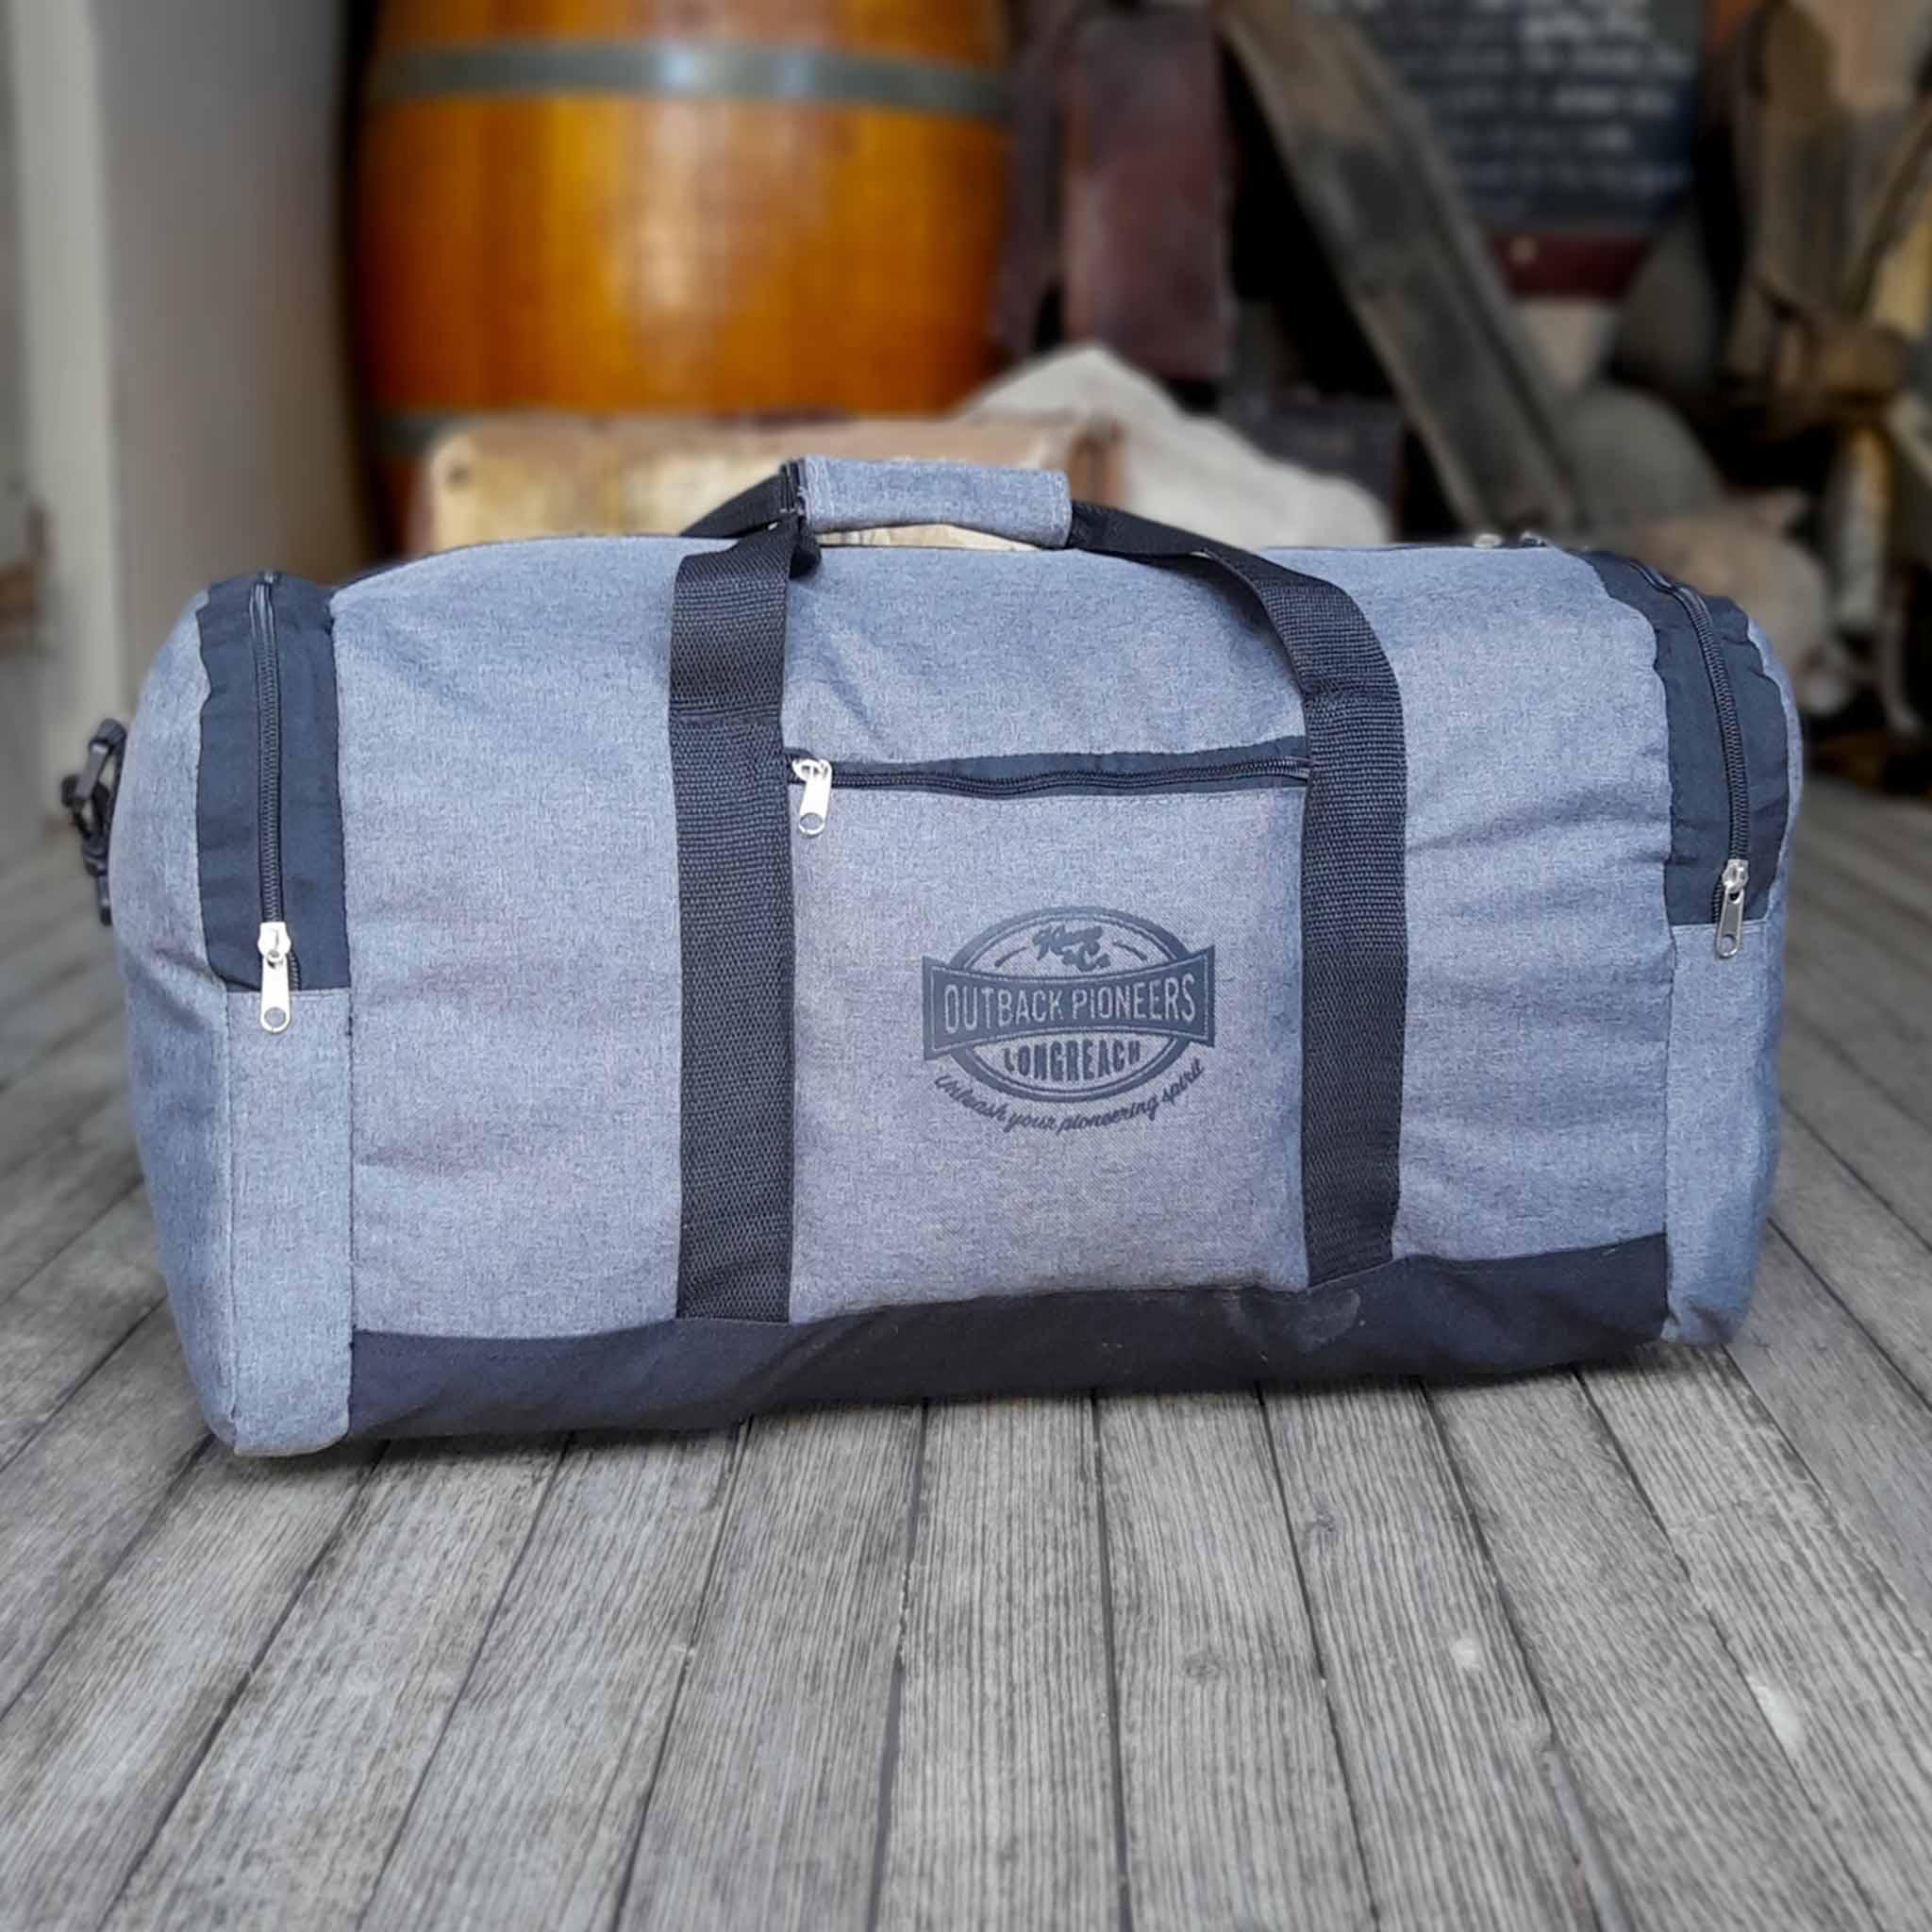 Outback Pioneers branded Black and Grey Duffle Bag. Carry on size.